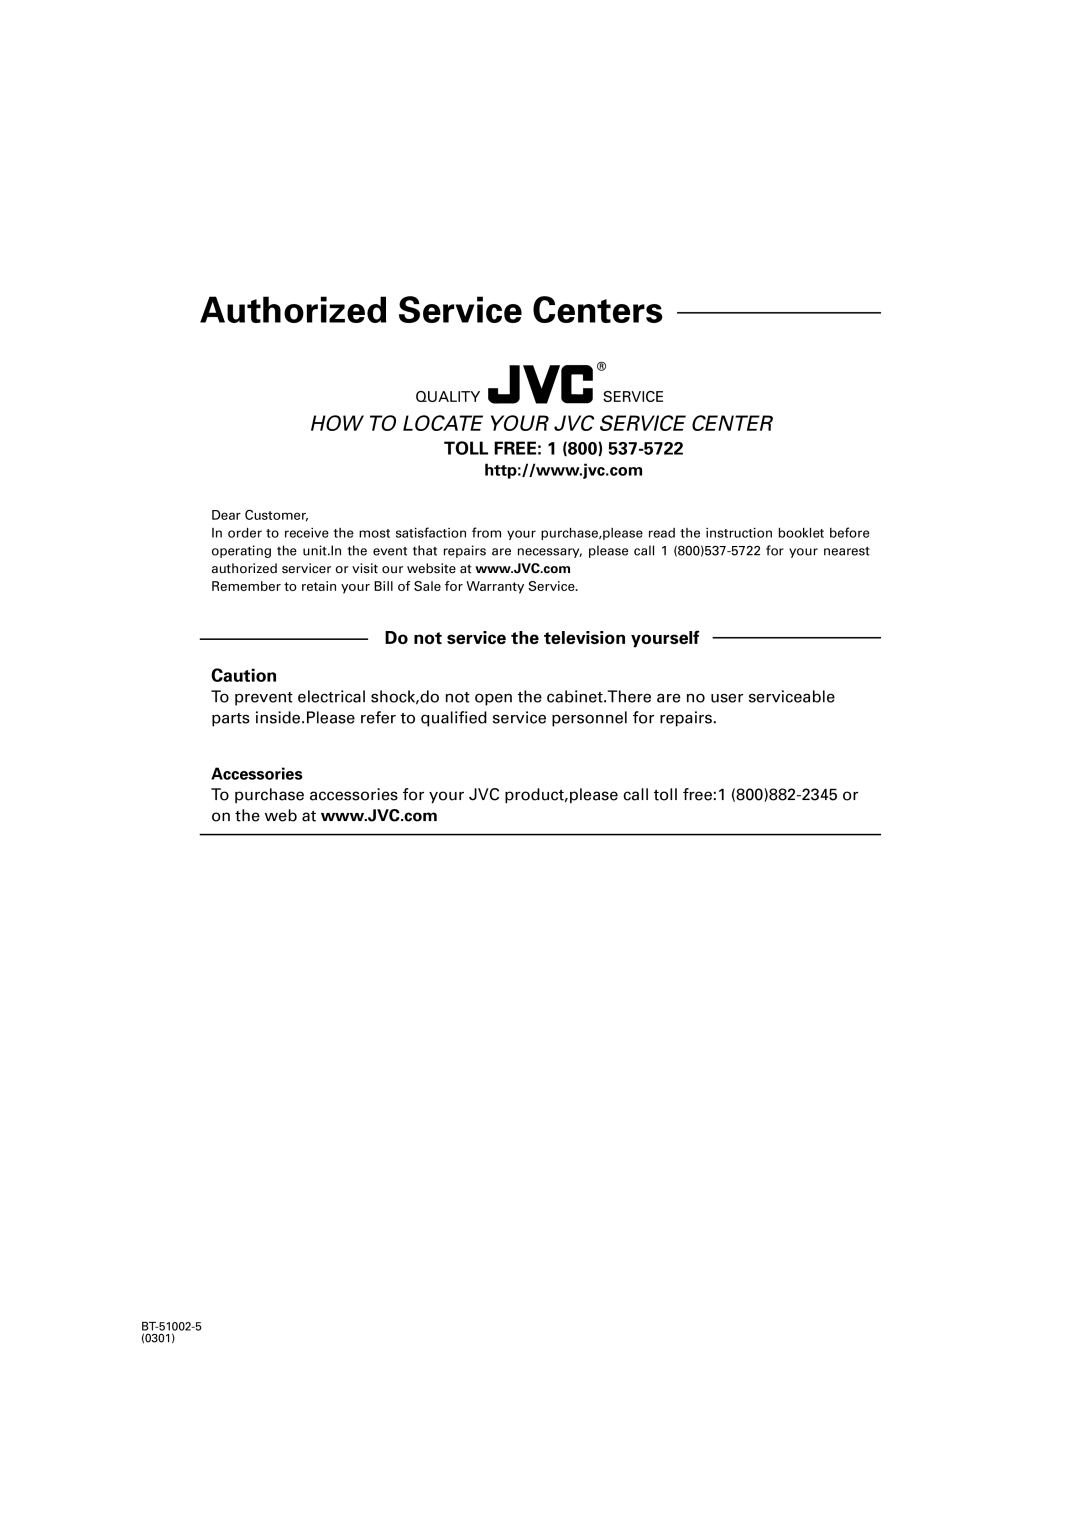 JVC RX-8020VBK manual Authorized Service Centers, How To Locate Your Jvc Service Center, TOLL FREE 1 800, Accessories 